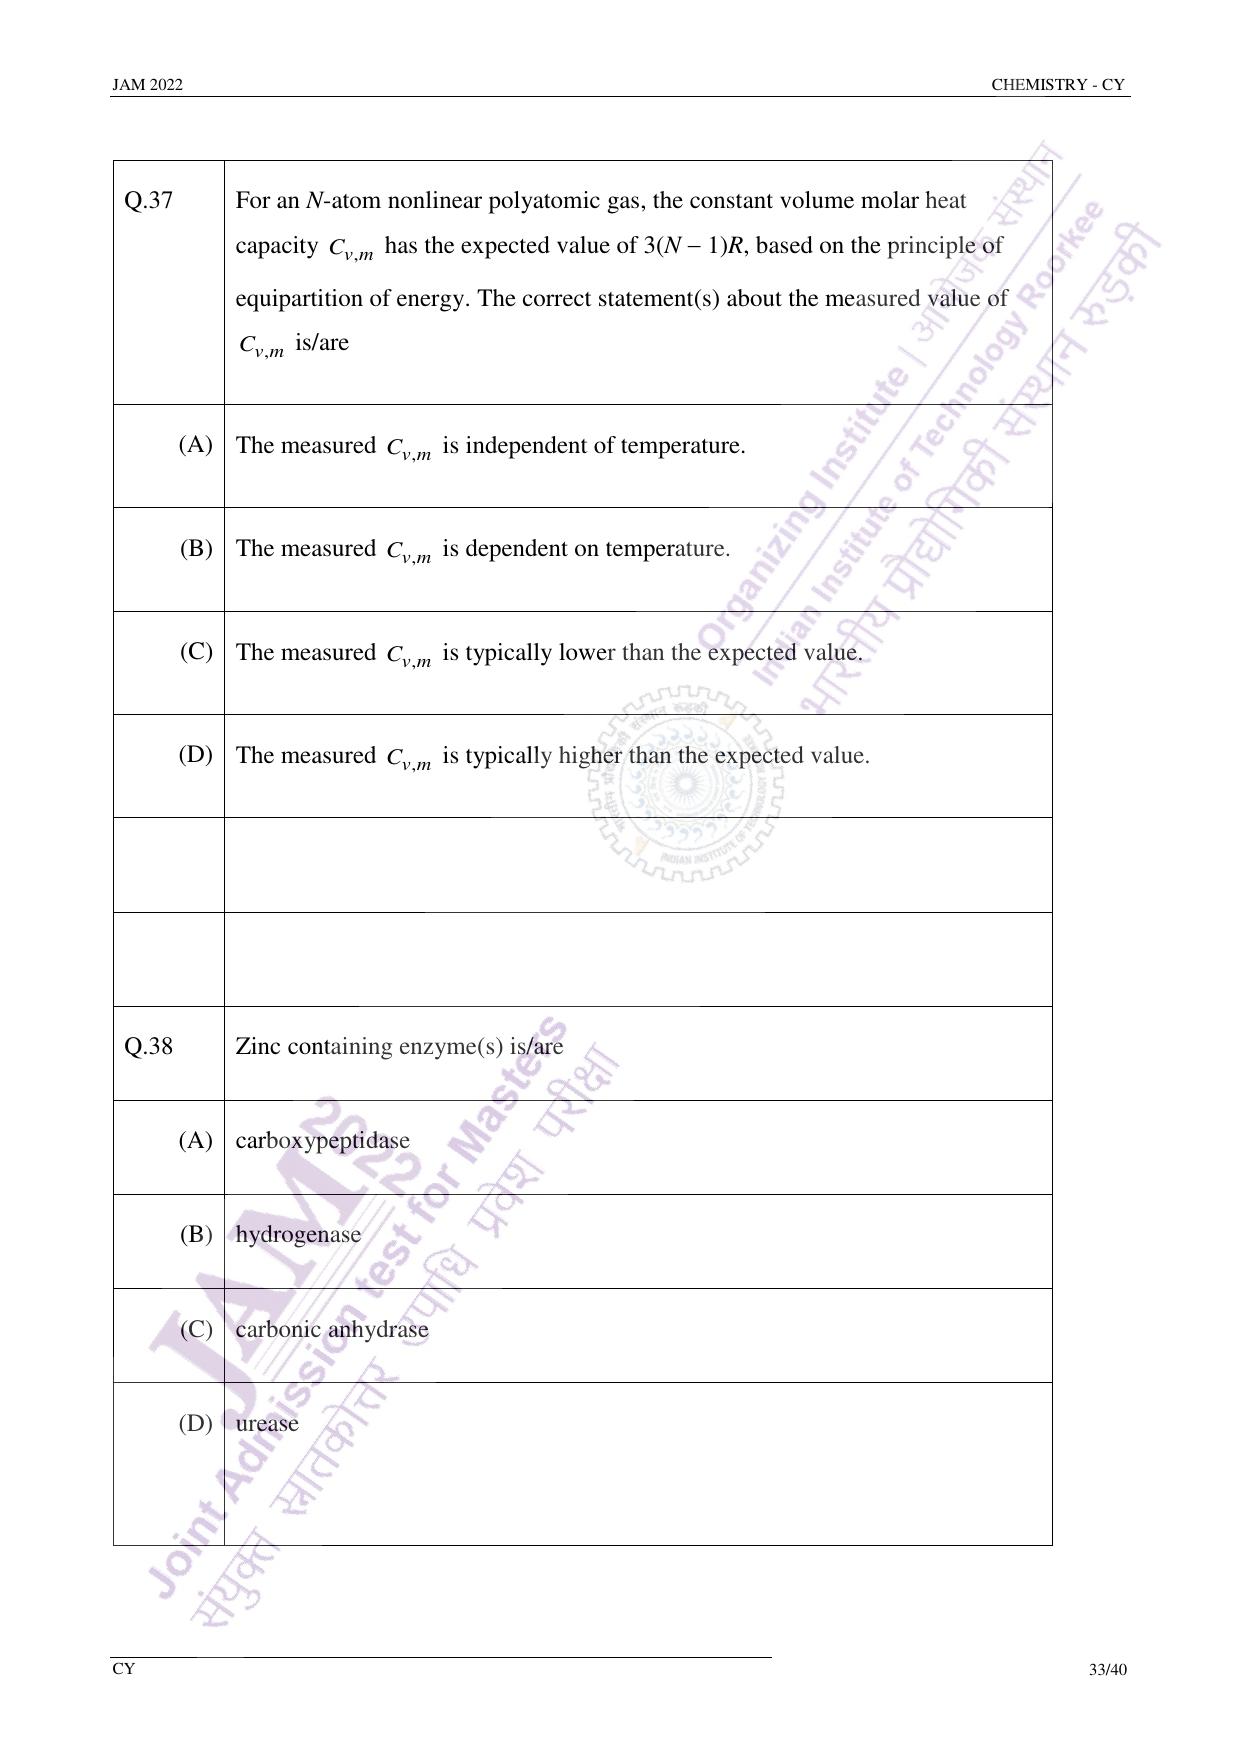 JAM 2022: CY Question Paper - Page 32